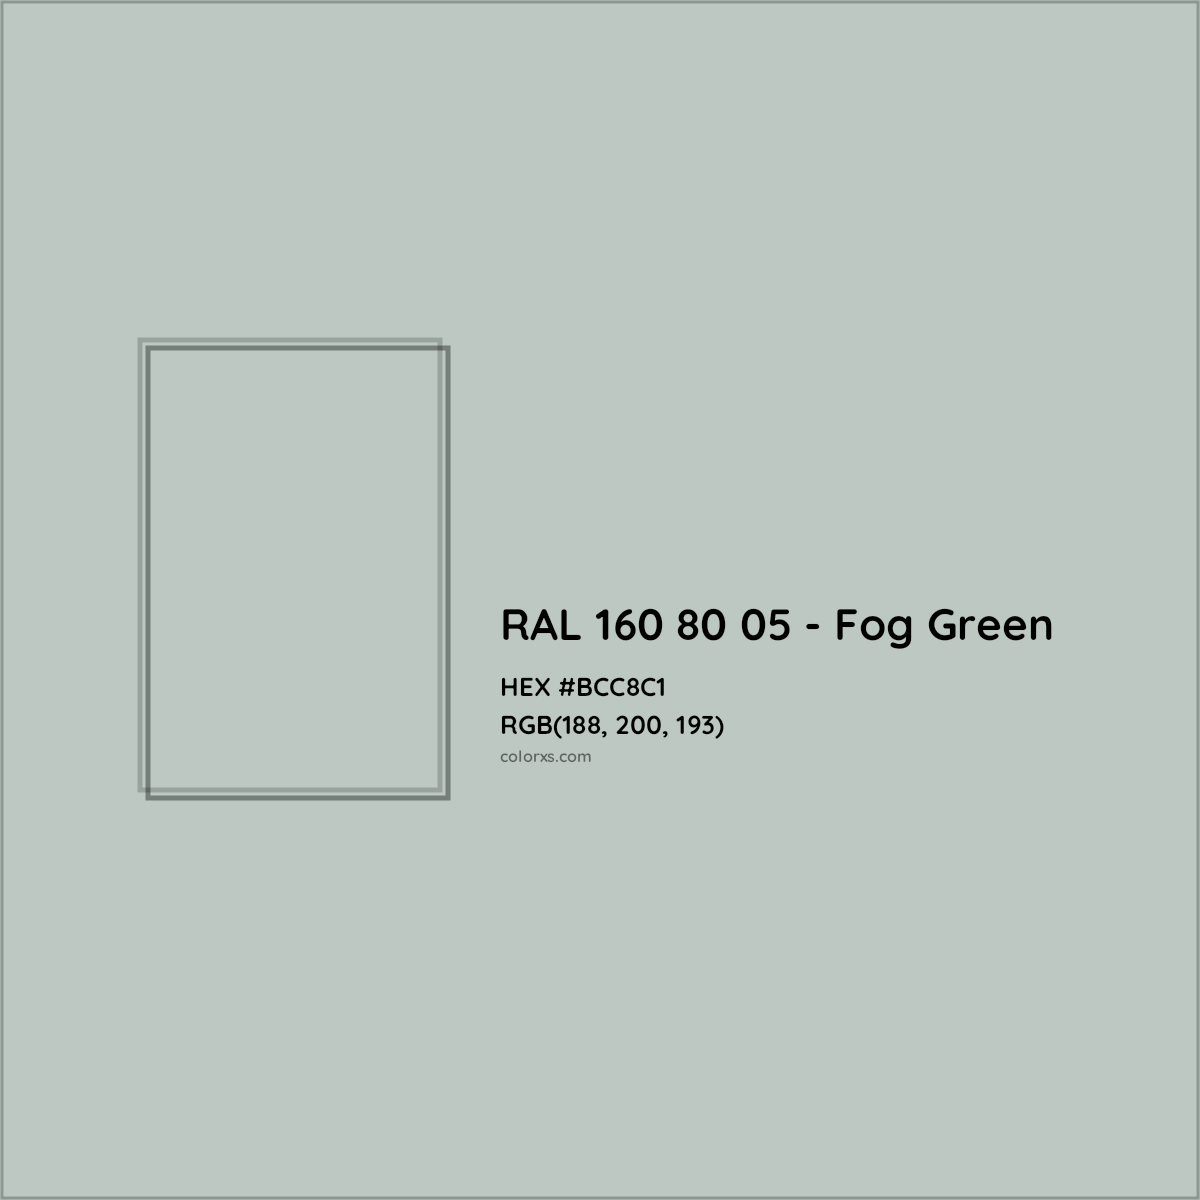 HEX #BCC8C1 RAL 160 80 05 - Fog Green CMS RAL Design - Color Code